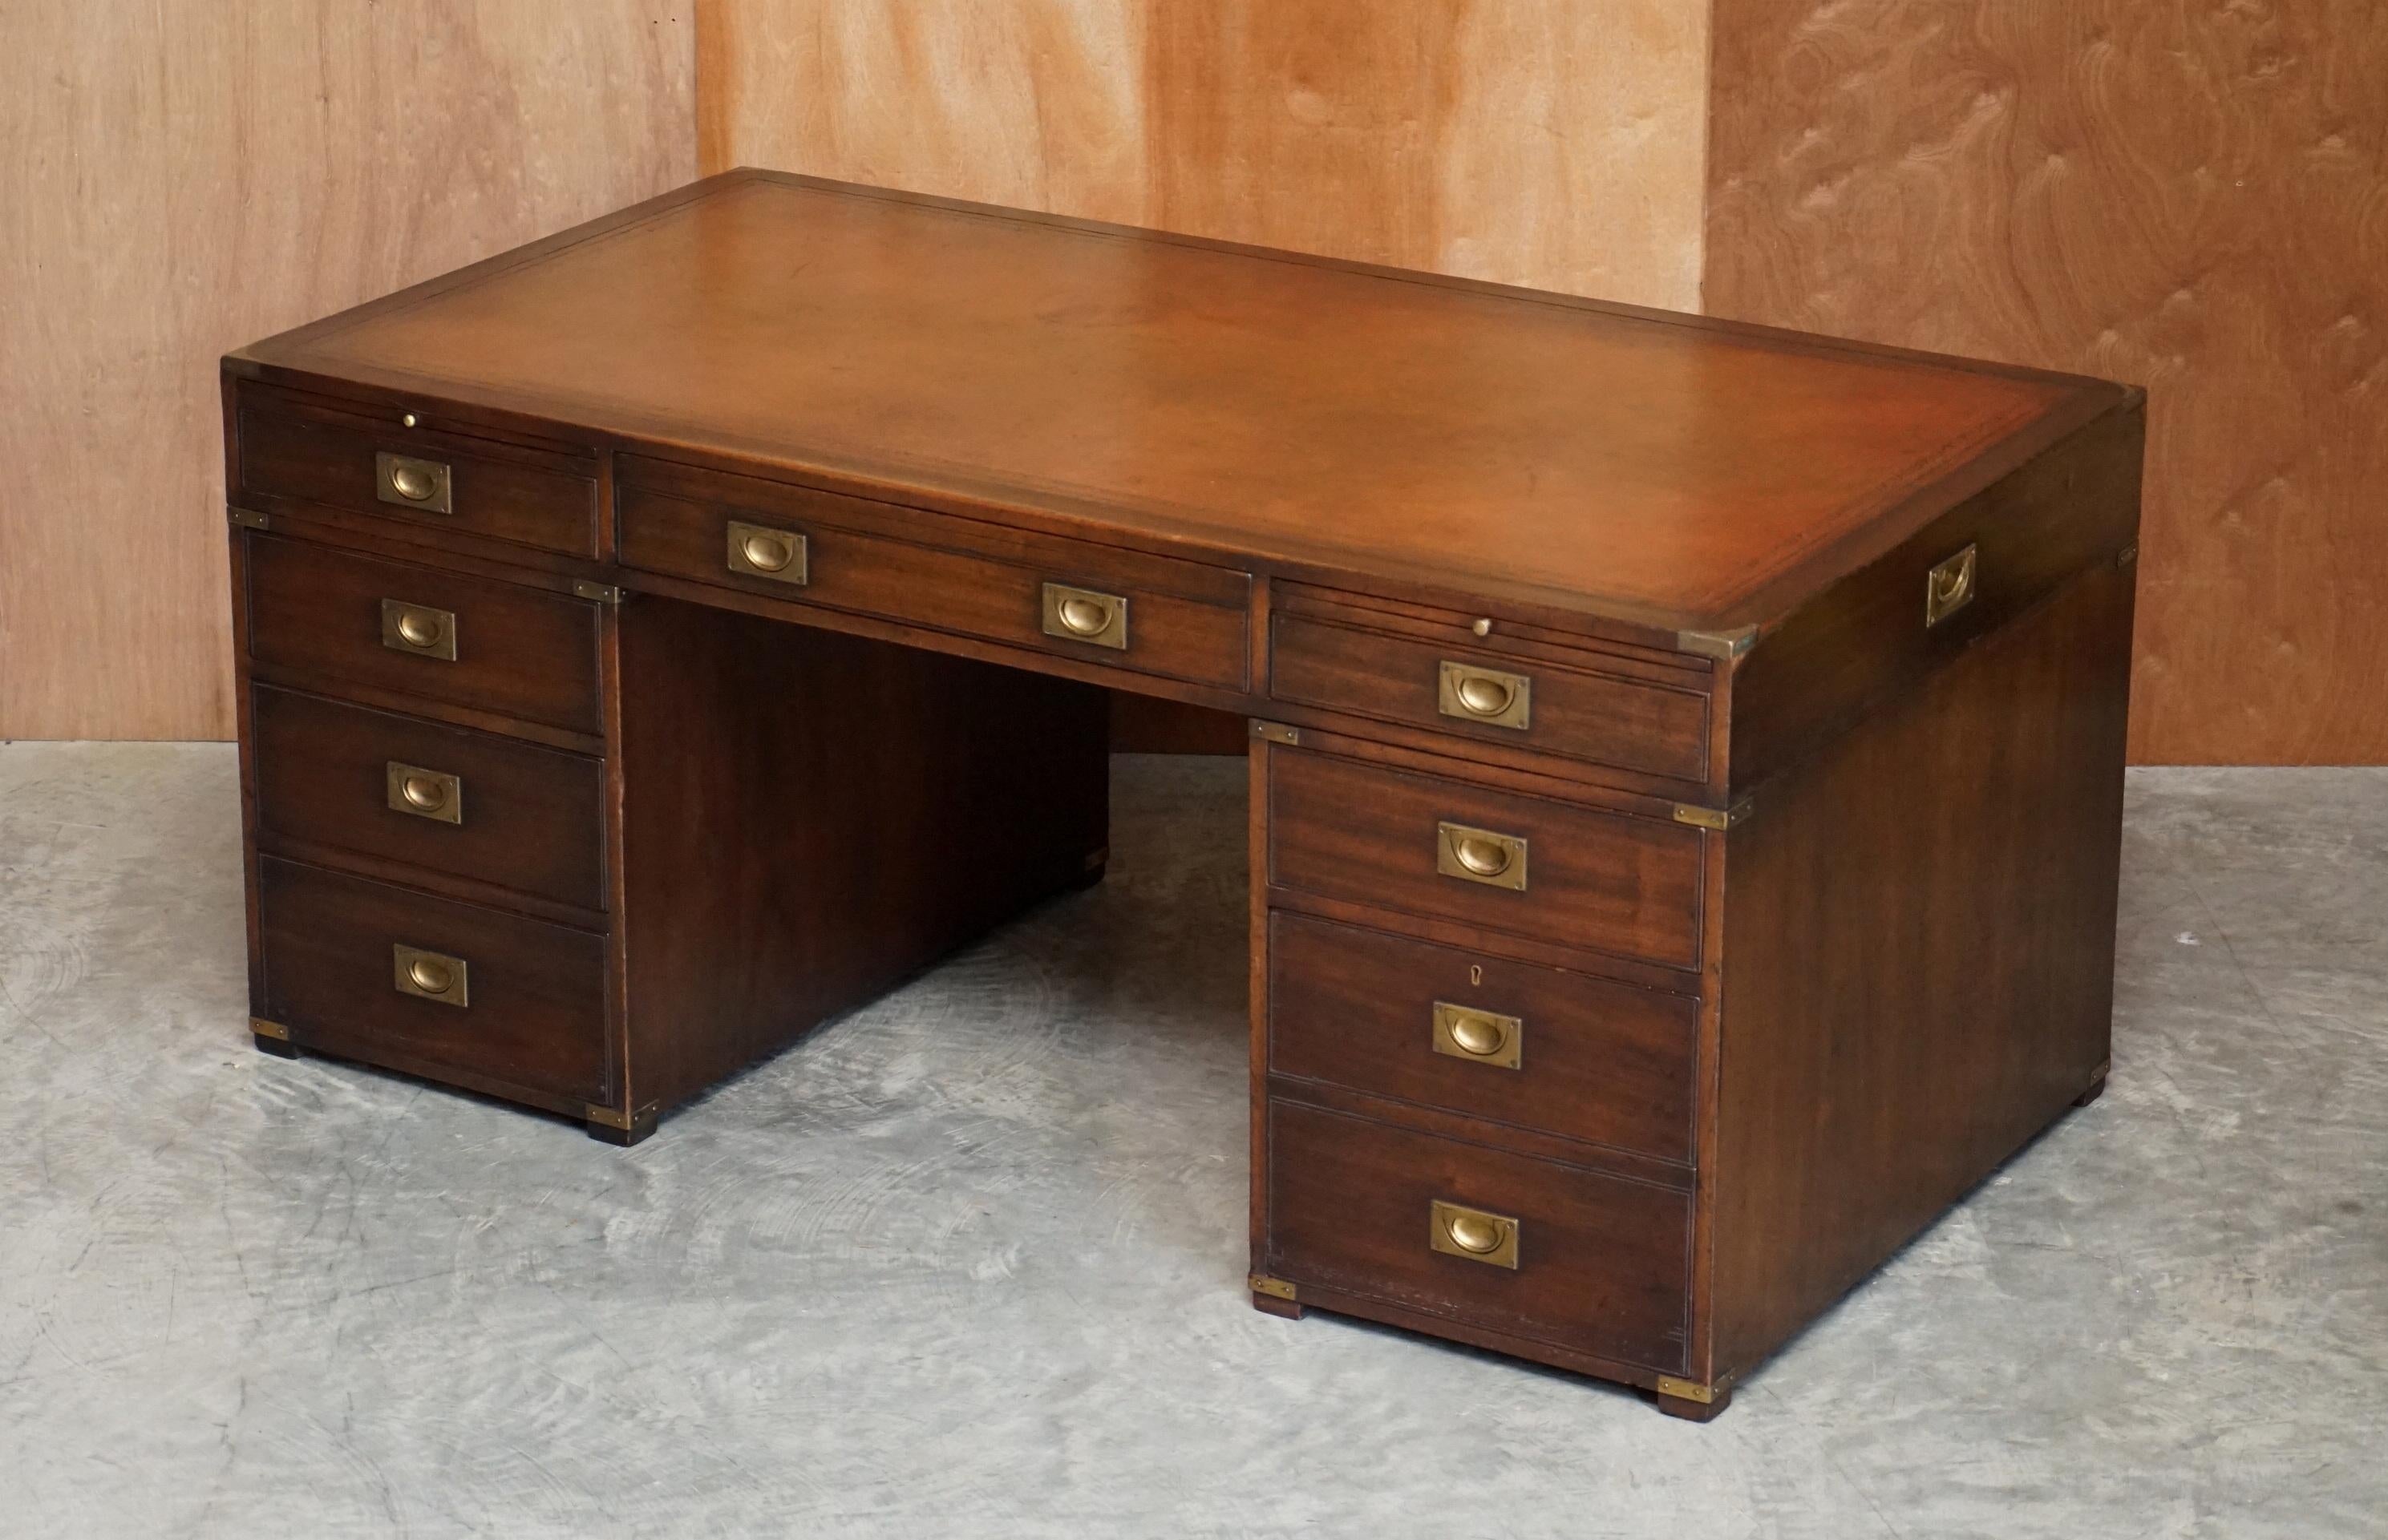 We are delighted to offer for sale this lovely hand made in England Harrods Kennedy Military Campaign twin pedestal double sided partner desk with bookcase back and brown leather writing surface

This desk is an absolutely stunning piece. The